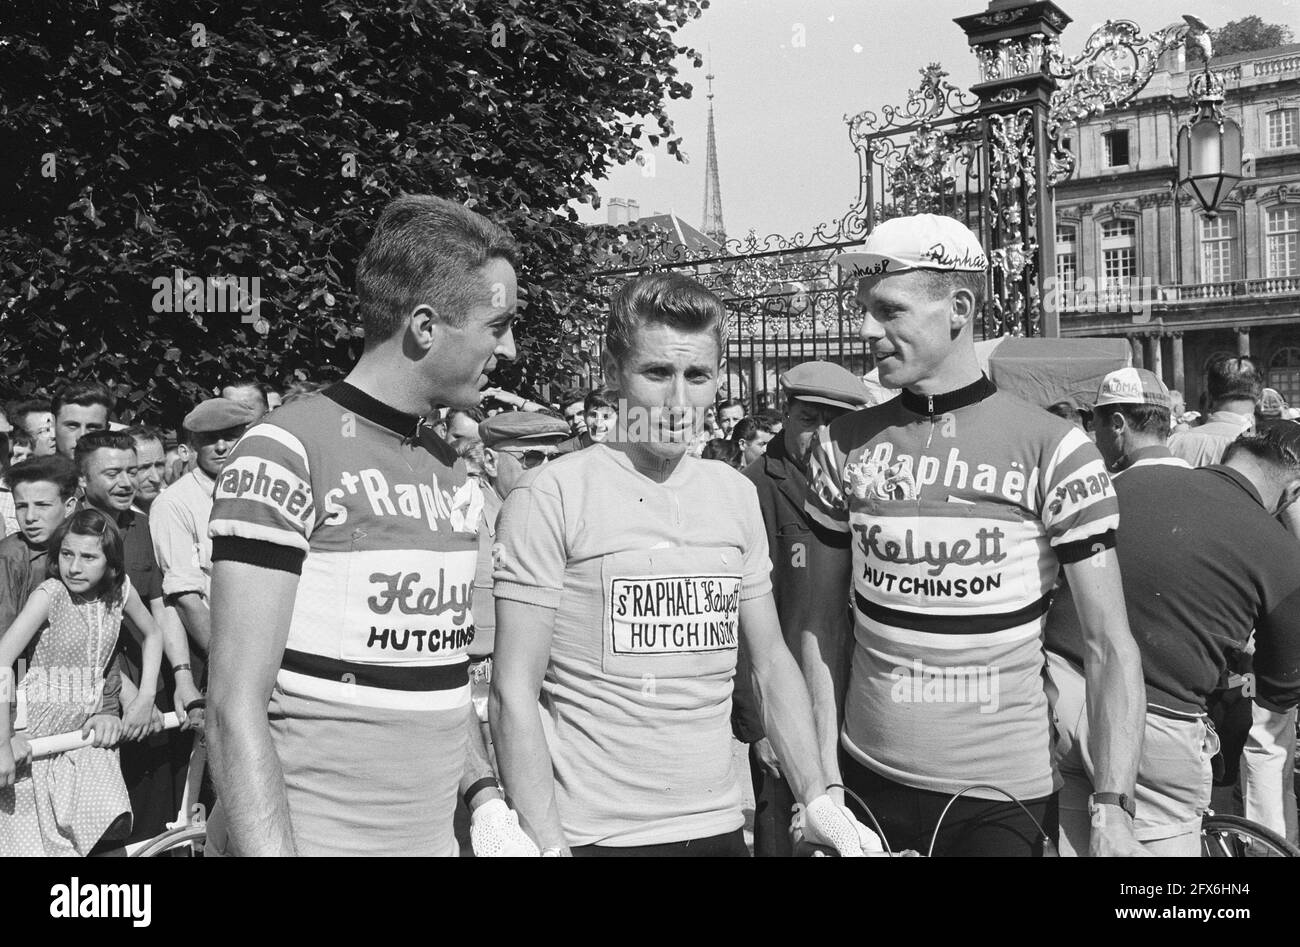 Ab Geldermans, Jacques Anquetil and Mies Stolker, Tour de France 1962 (2), The Netherlands, 20th century press agency photo, news to remember, documentary, historic photography 1945-1990, visual stories, human history of the Twentieth Century, capturing moments in time Stock Photo